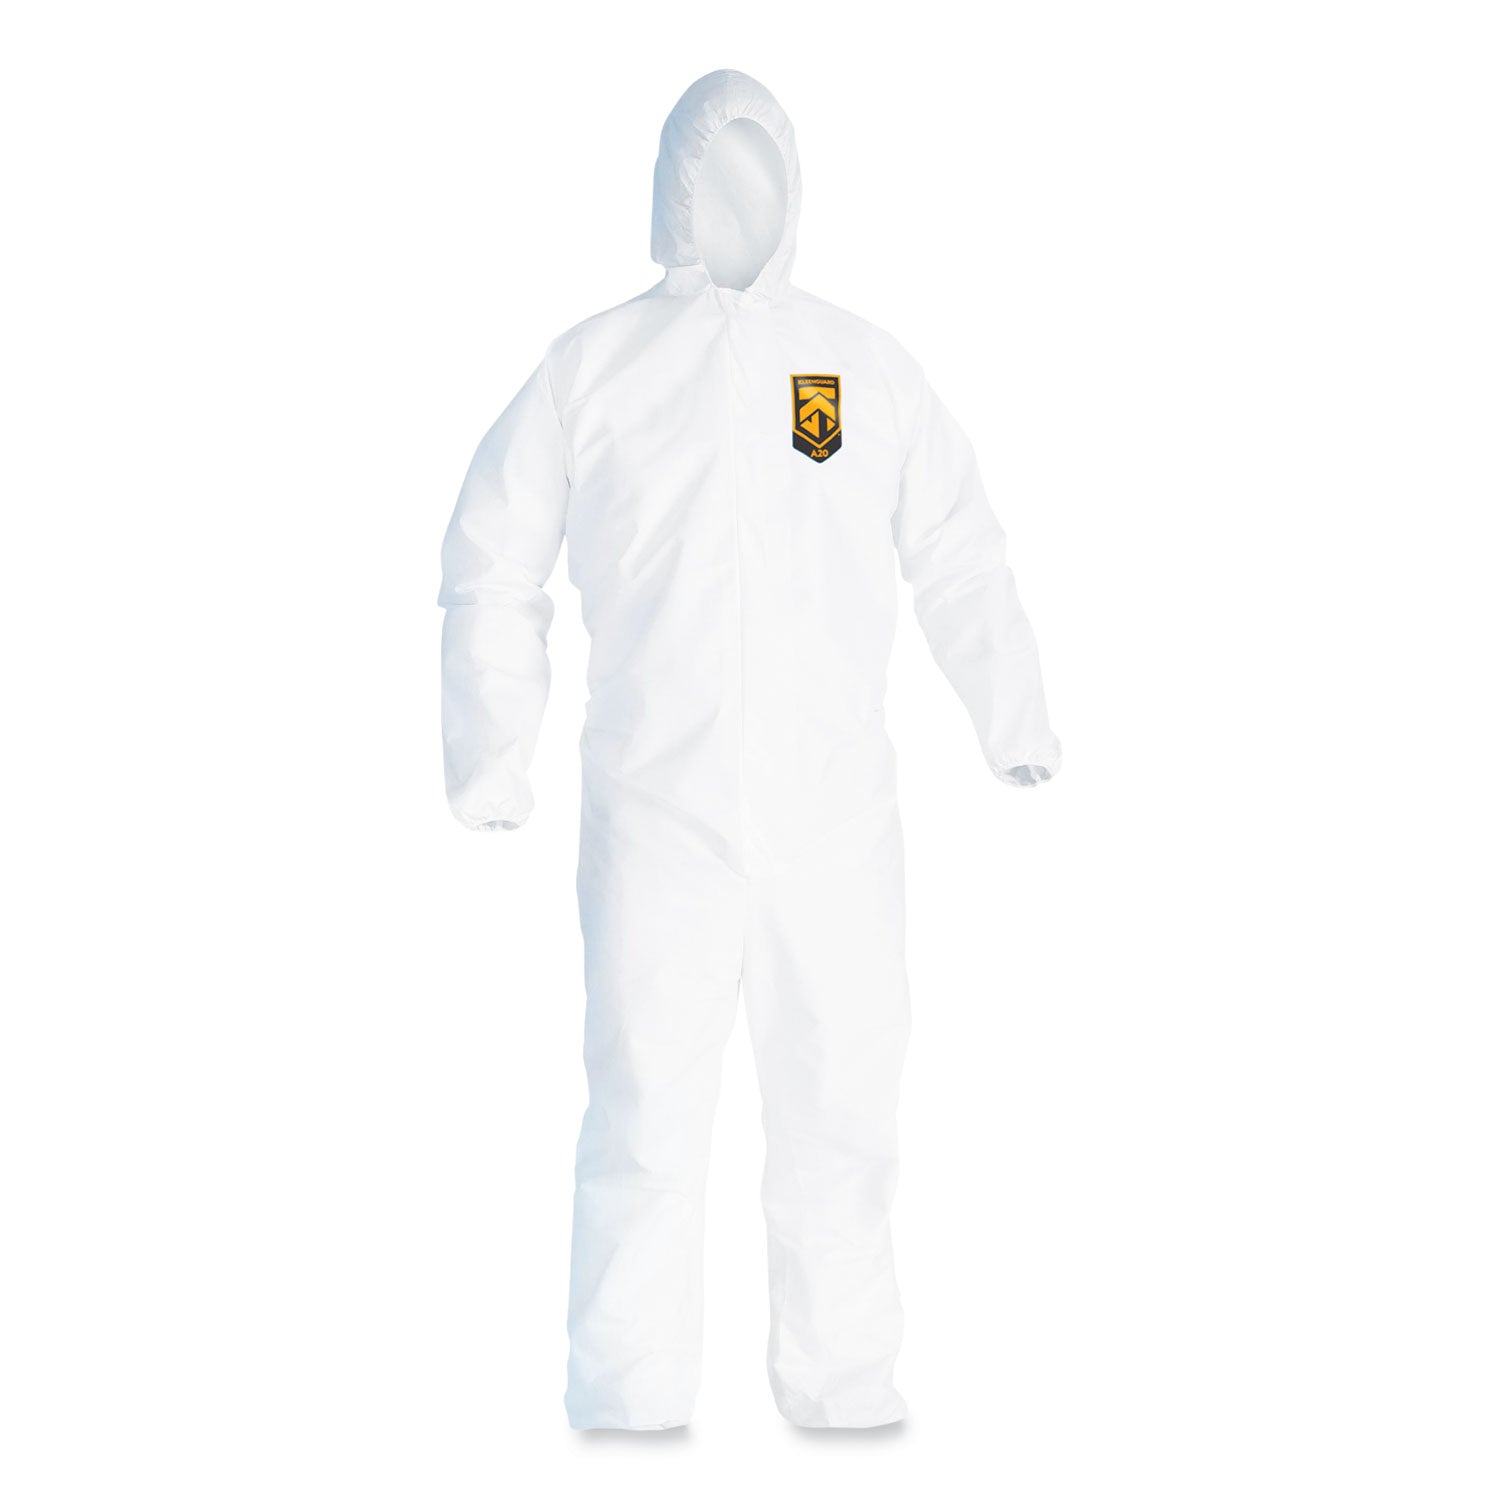 a20-breathable-particle-protection-coveralls-elastic-back-hood-medium-white-24-carton_kcc49112 - 1